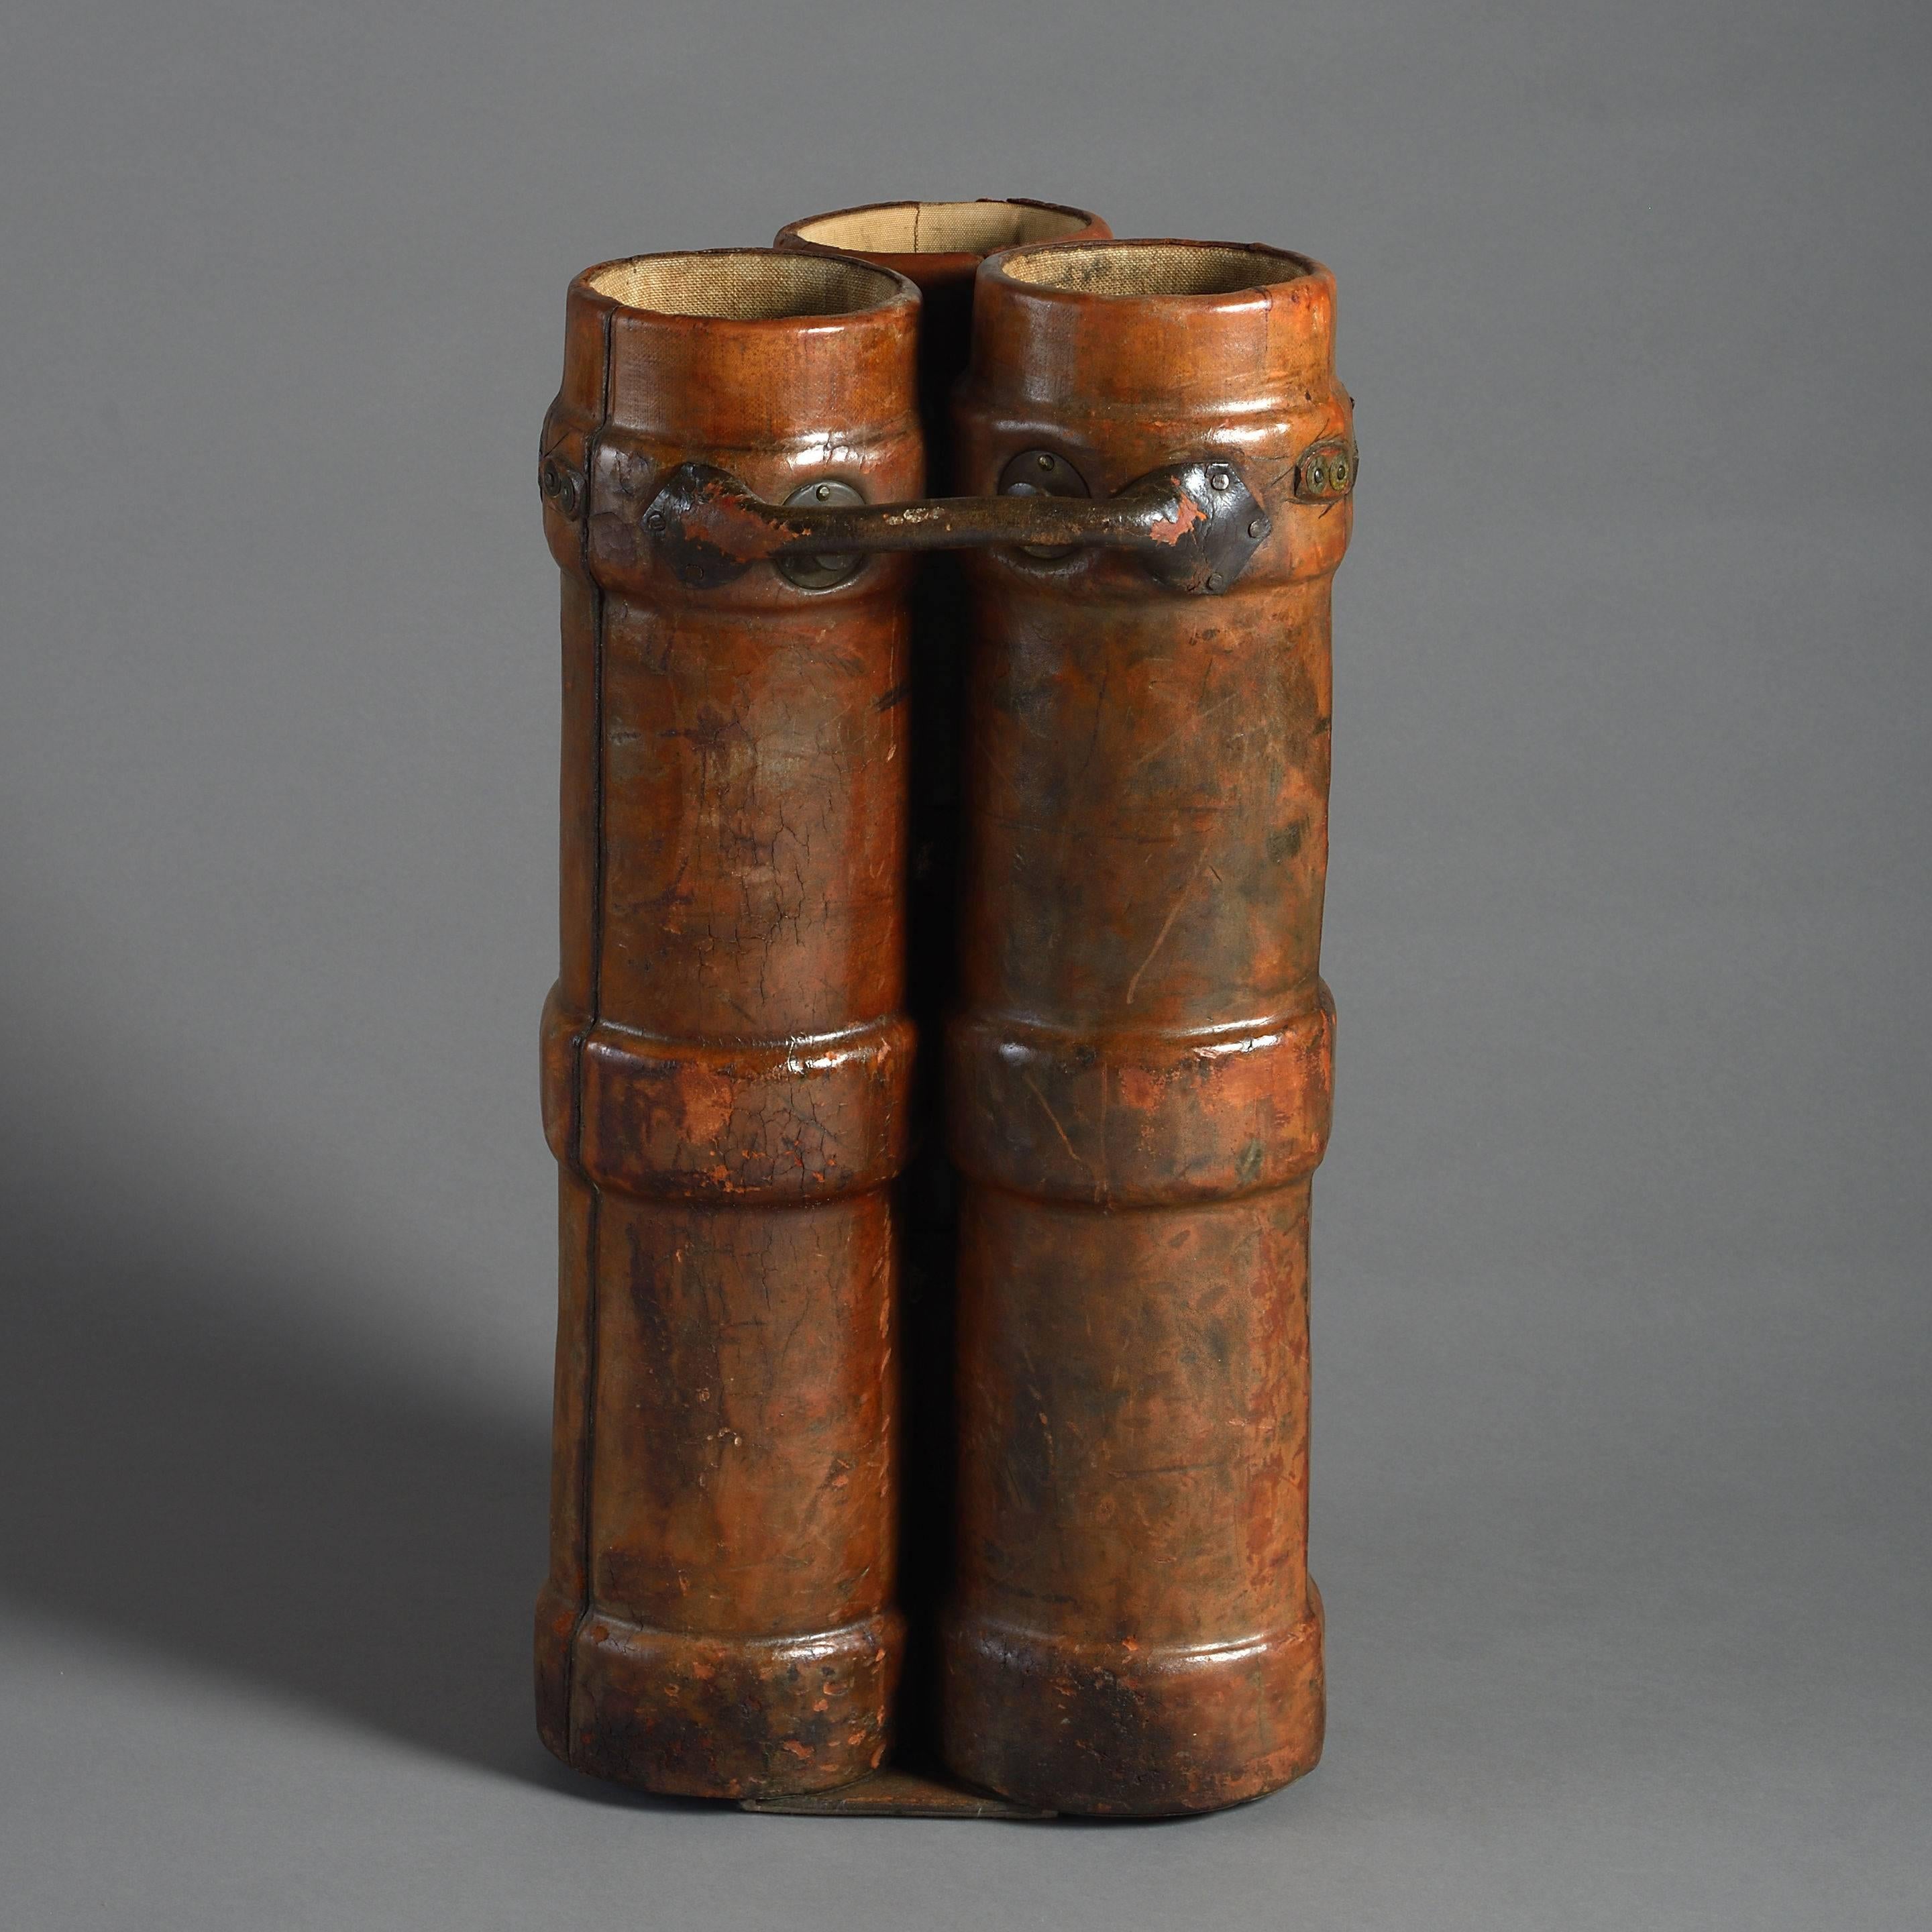 A rare late 19th century stitched leather military shell holder with three cases and decorated with the Royal Arms.